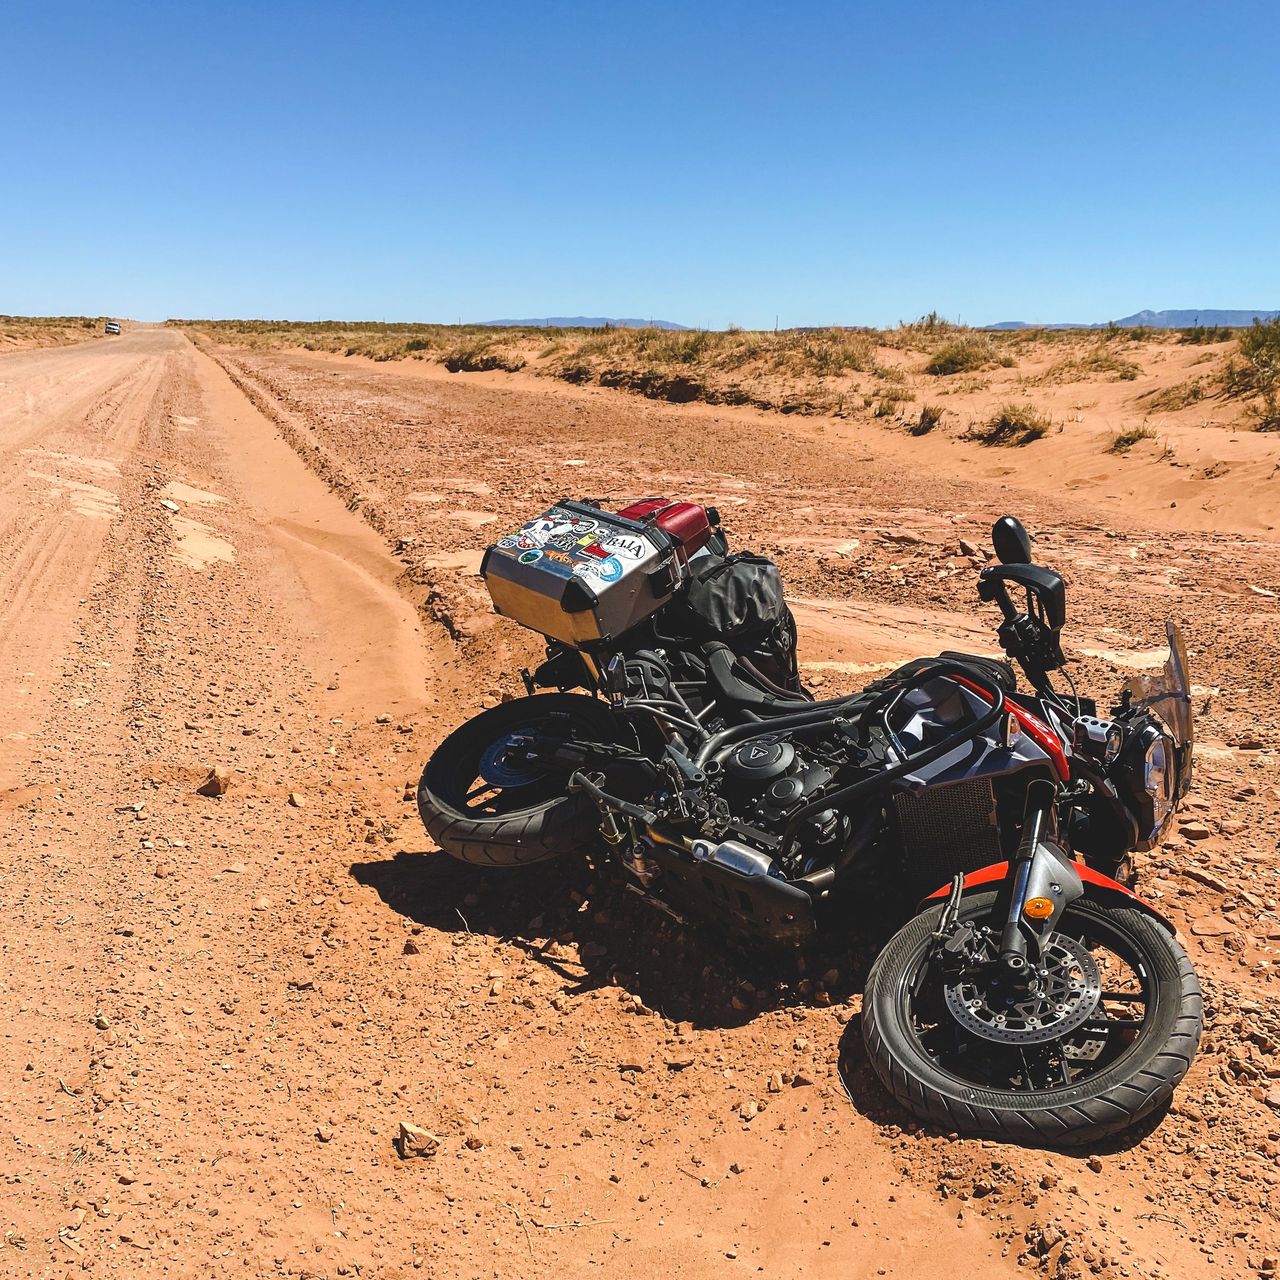 I had a get-off after I hit a deep section of sand. Unwritten rule of adventure riding: Take photos first! Navajo Nation, Arizona.